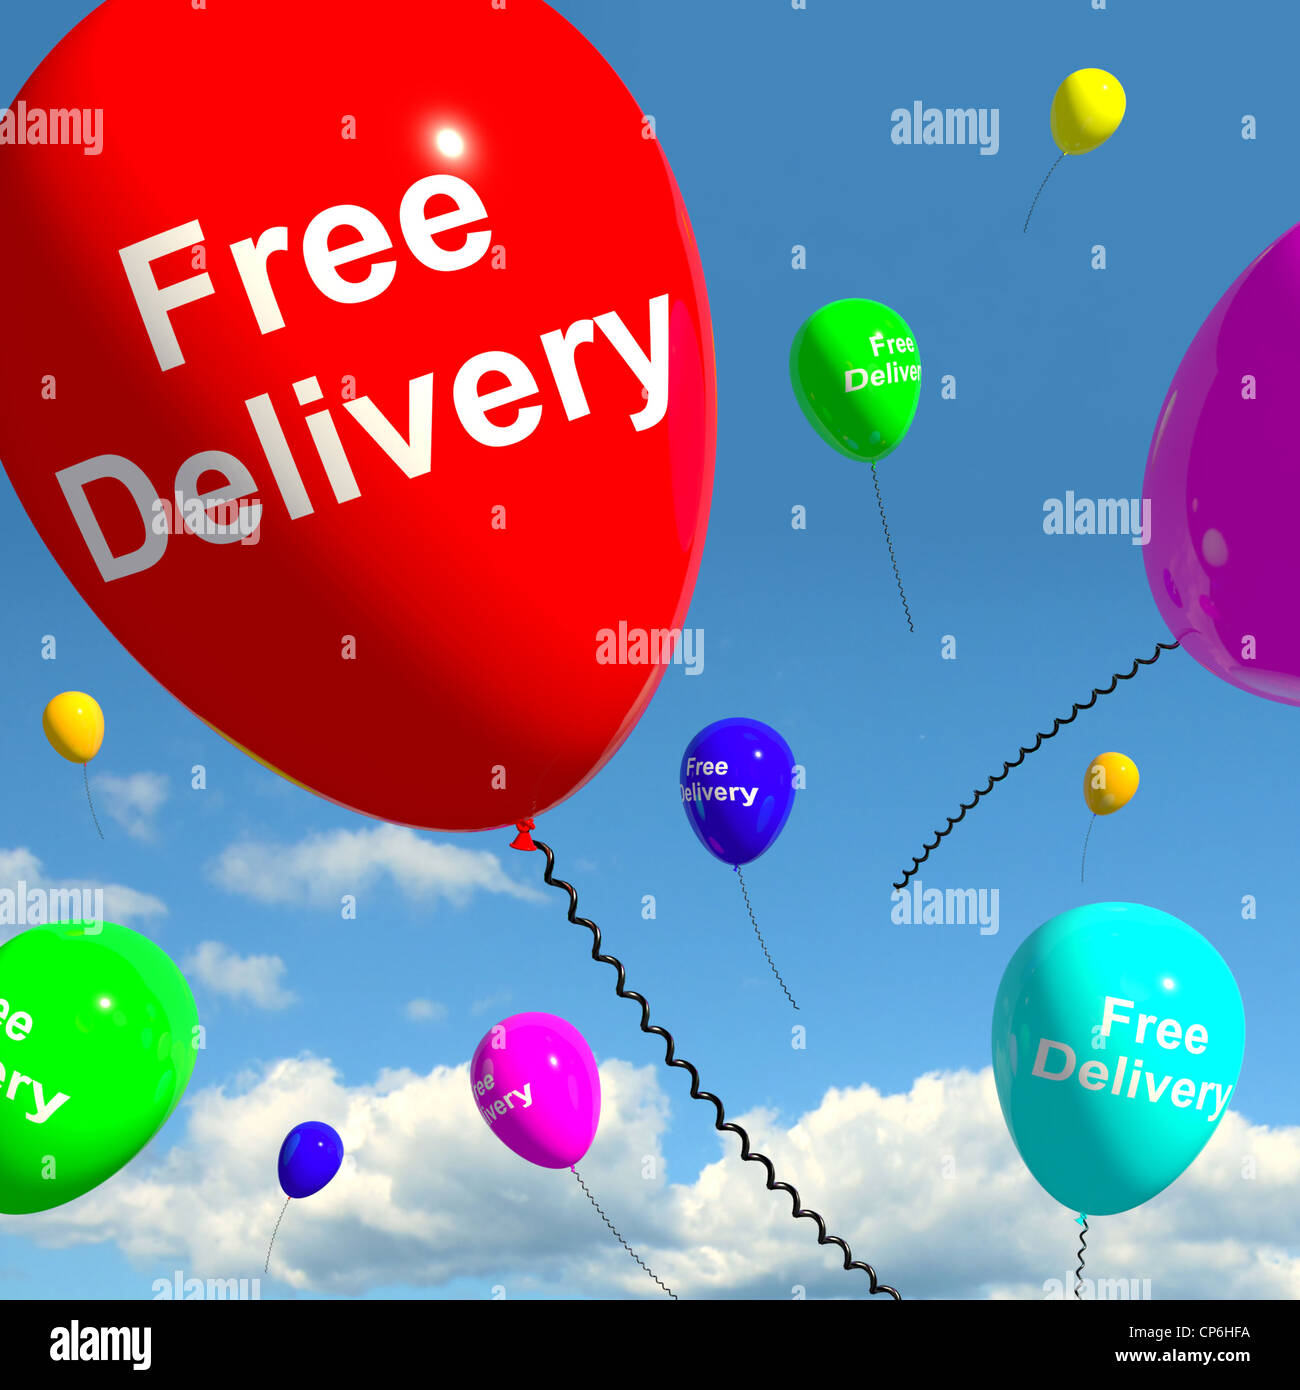 Free Delivery Balloons Shows No Charge Or Gratis To Deliver Stock Photo